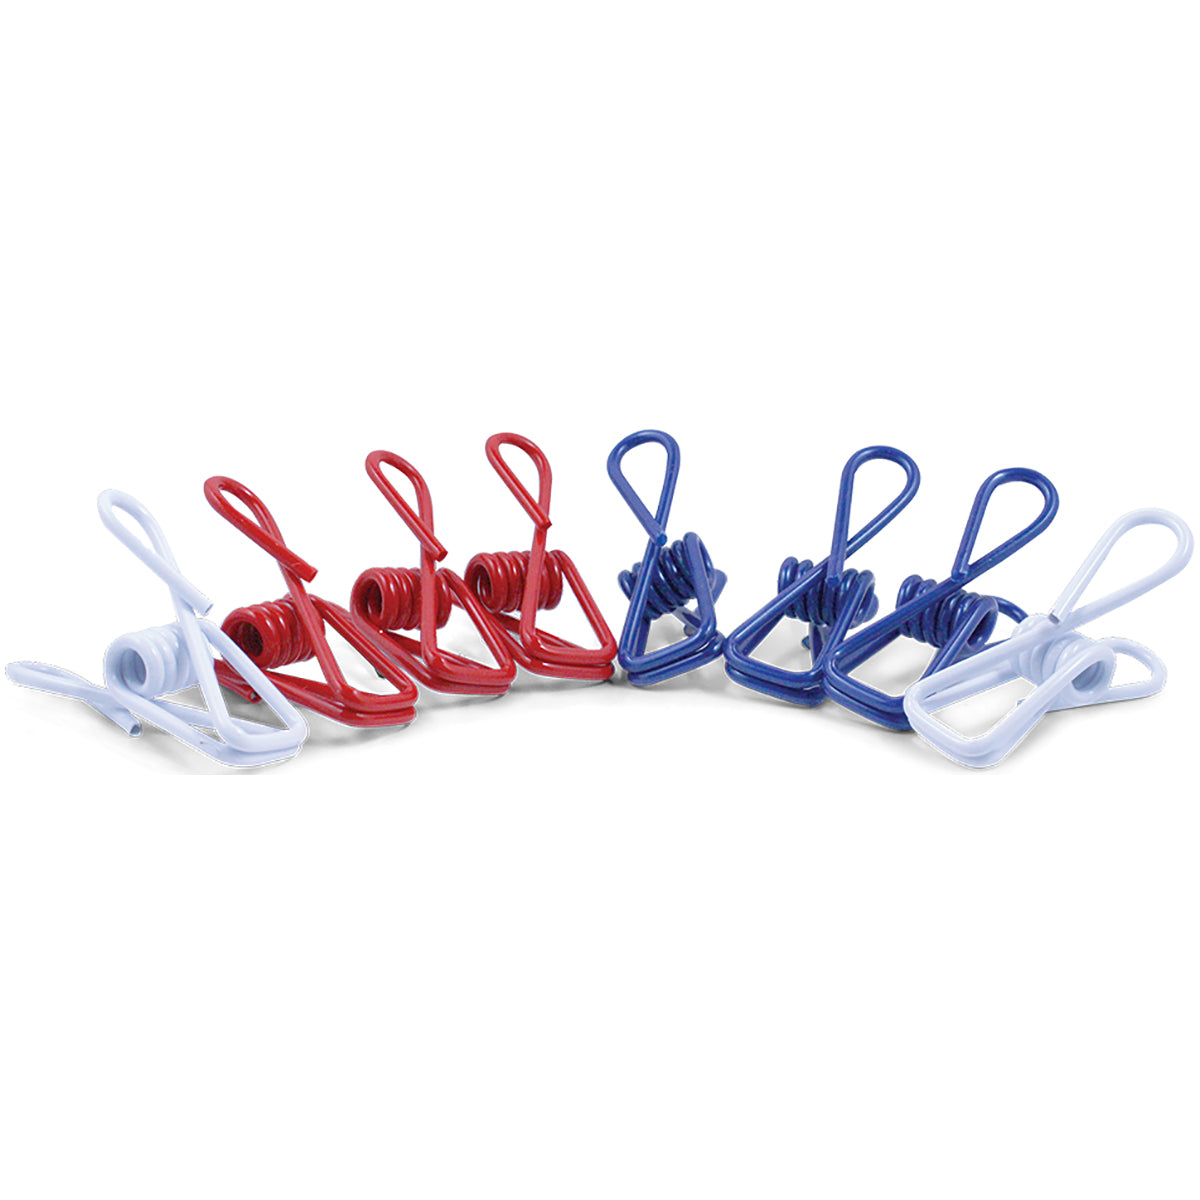 Coghlan's Clothes Clips (8 Pack), Plastic Coated Wire Clothesline Spring Clips